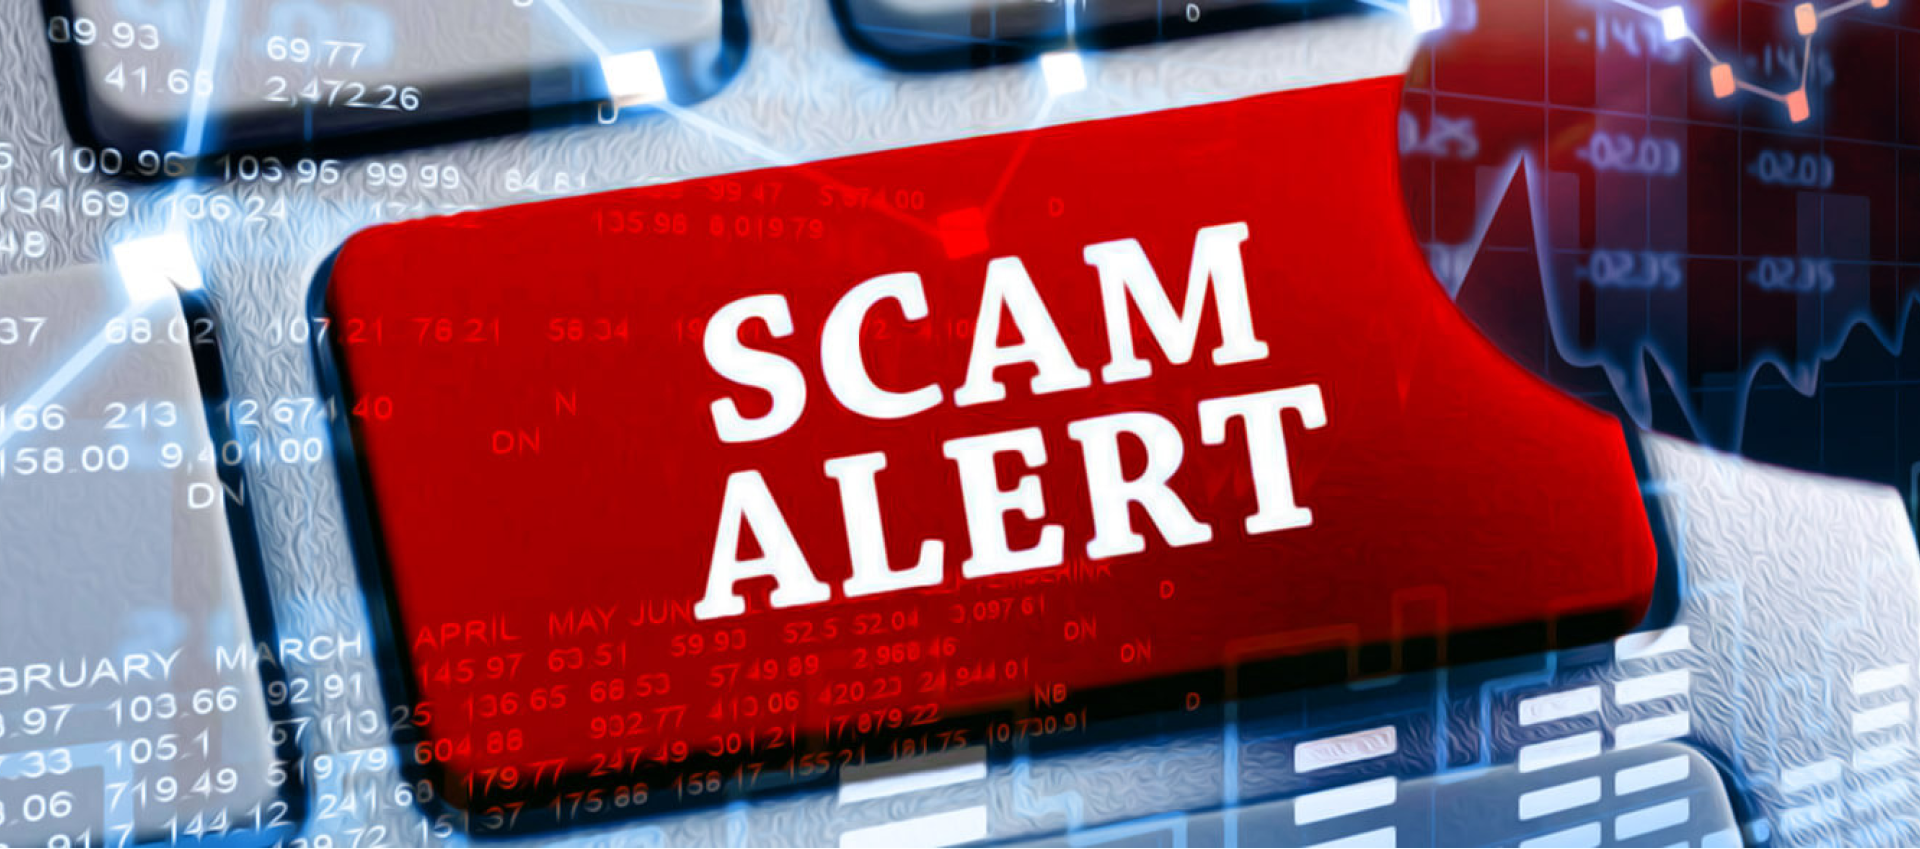 Steam scam sites фото 72